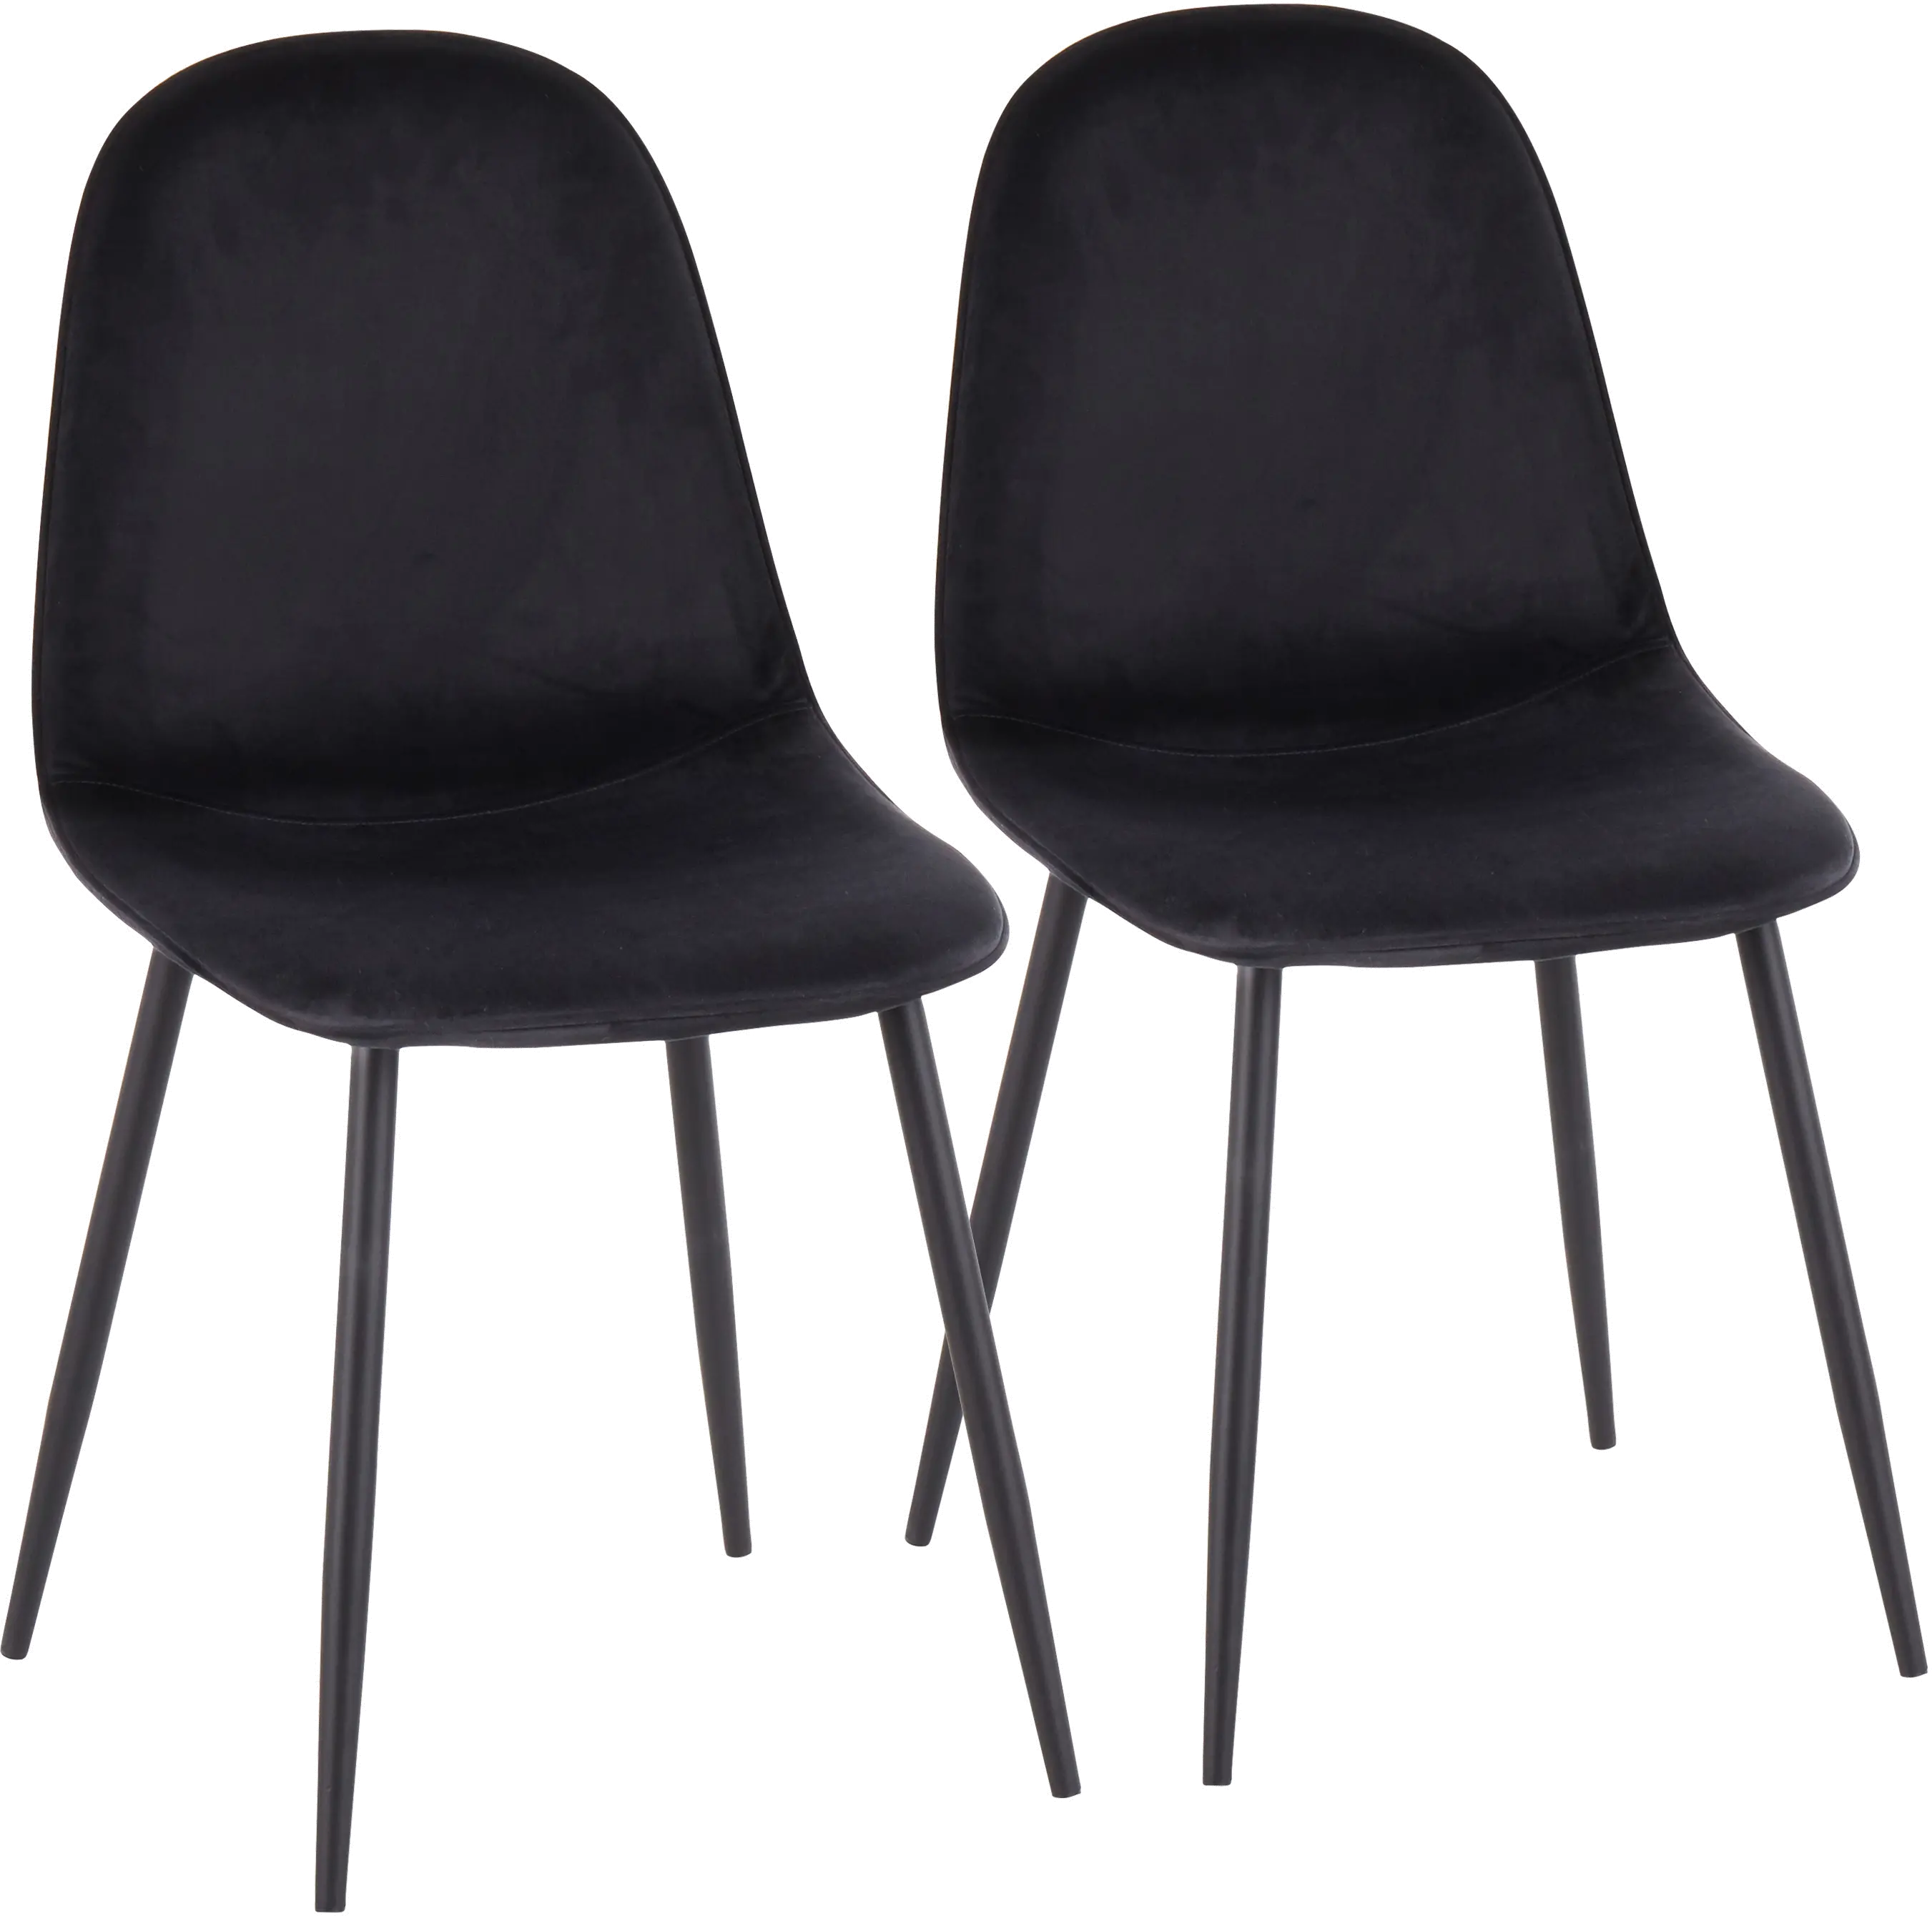 Contemporary Black Dining Room Chair (Set of 2) - Pebble